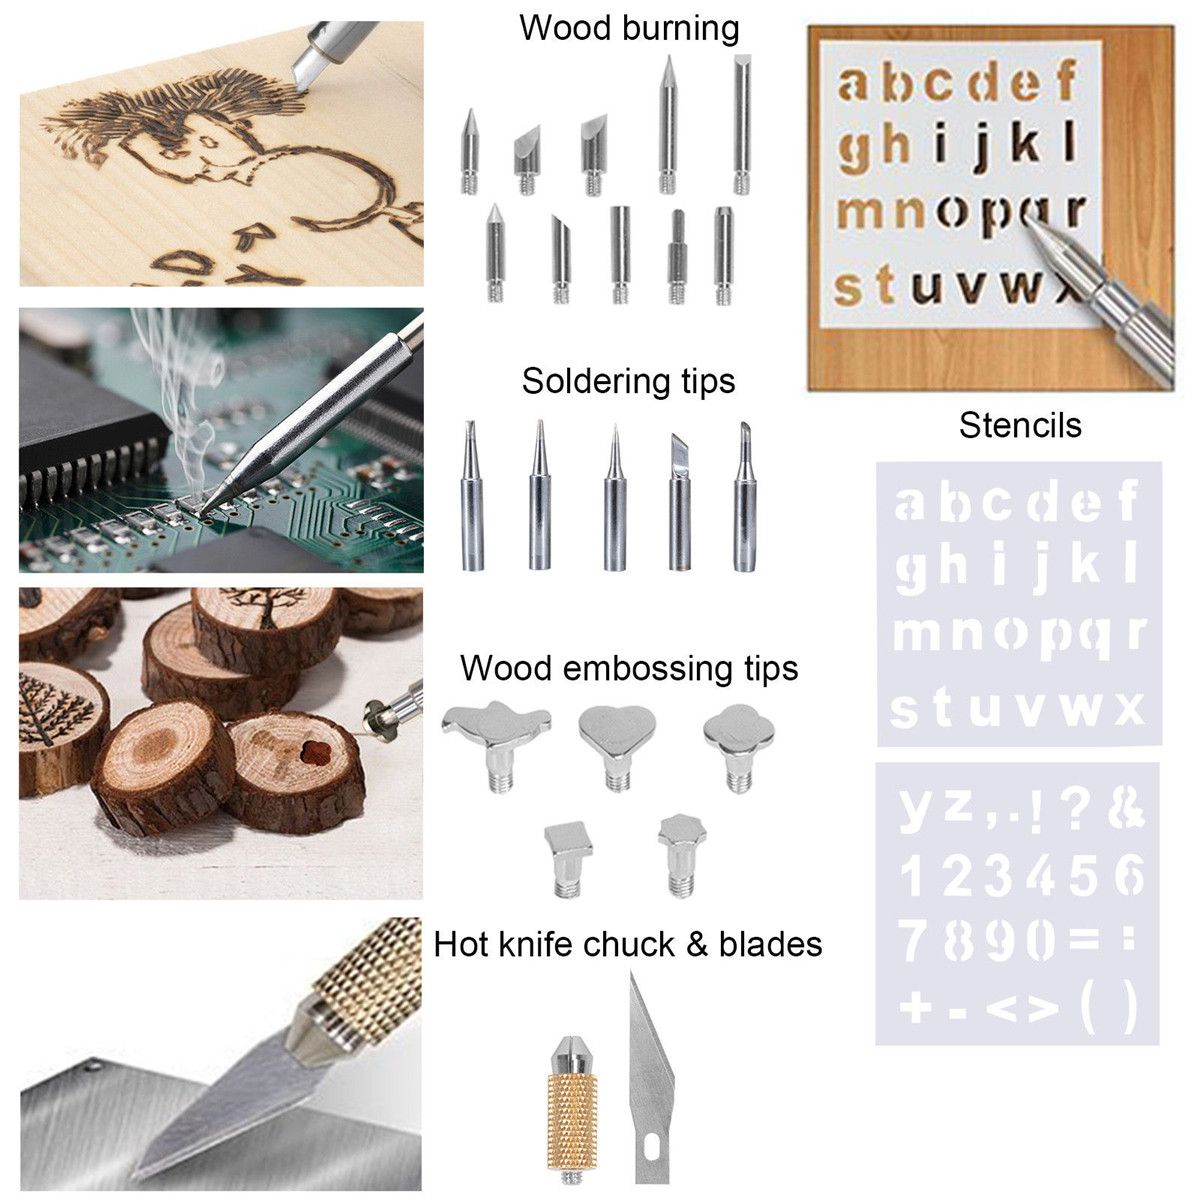 48Pcs-60W-110V220V-Adjustable-Temperature-Solder-Iron-Tool-Kit-Carving-Pyrography-Tool-Wood-Embossin-1370080